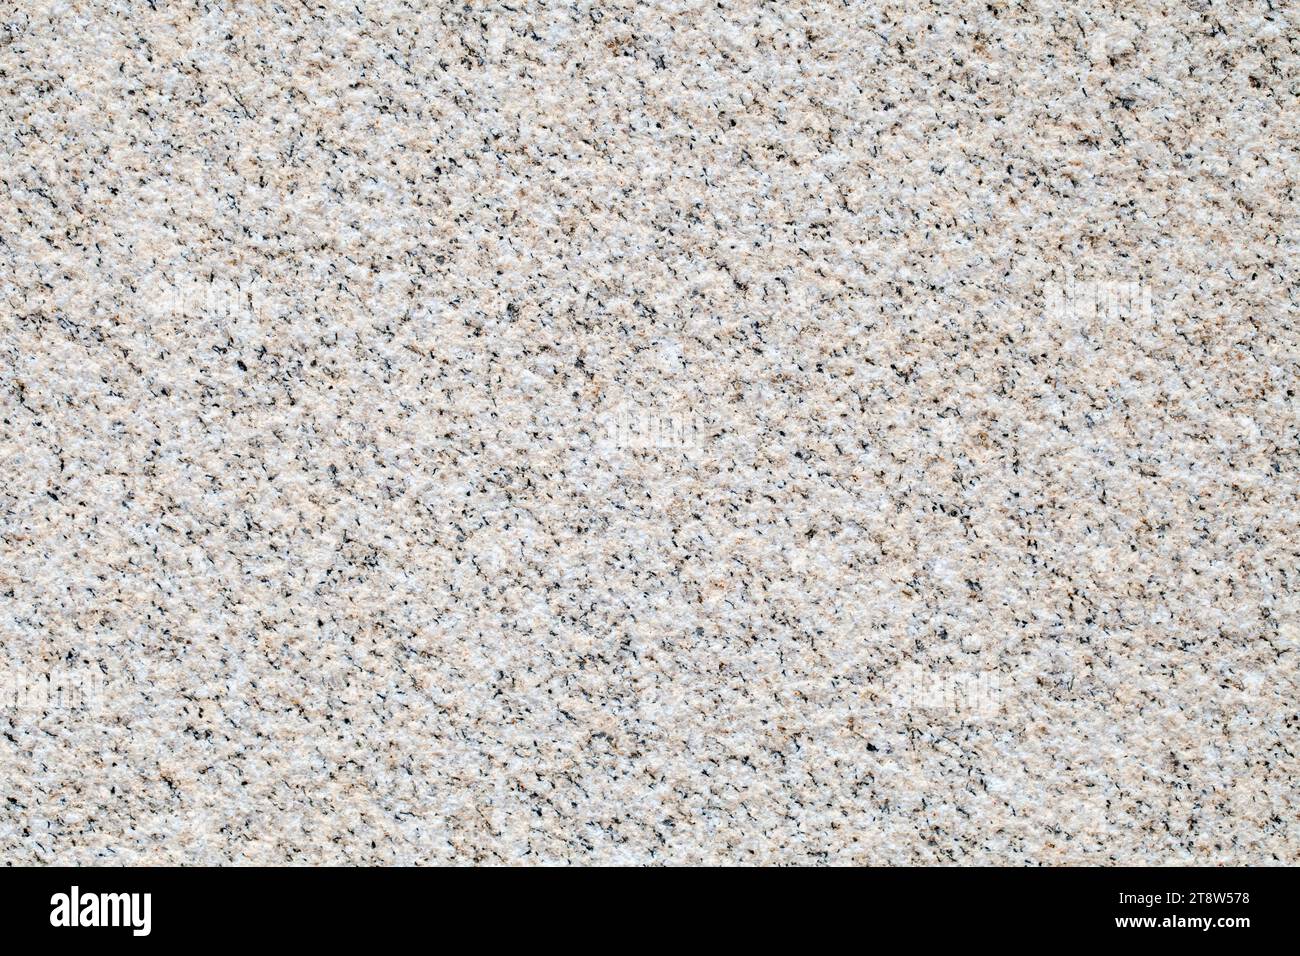 Background travertine close-up, texture stone, calcareous tuff, polycrystalline brittle fine-grained homogeneous rock Stock Photo